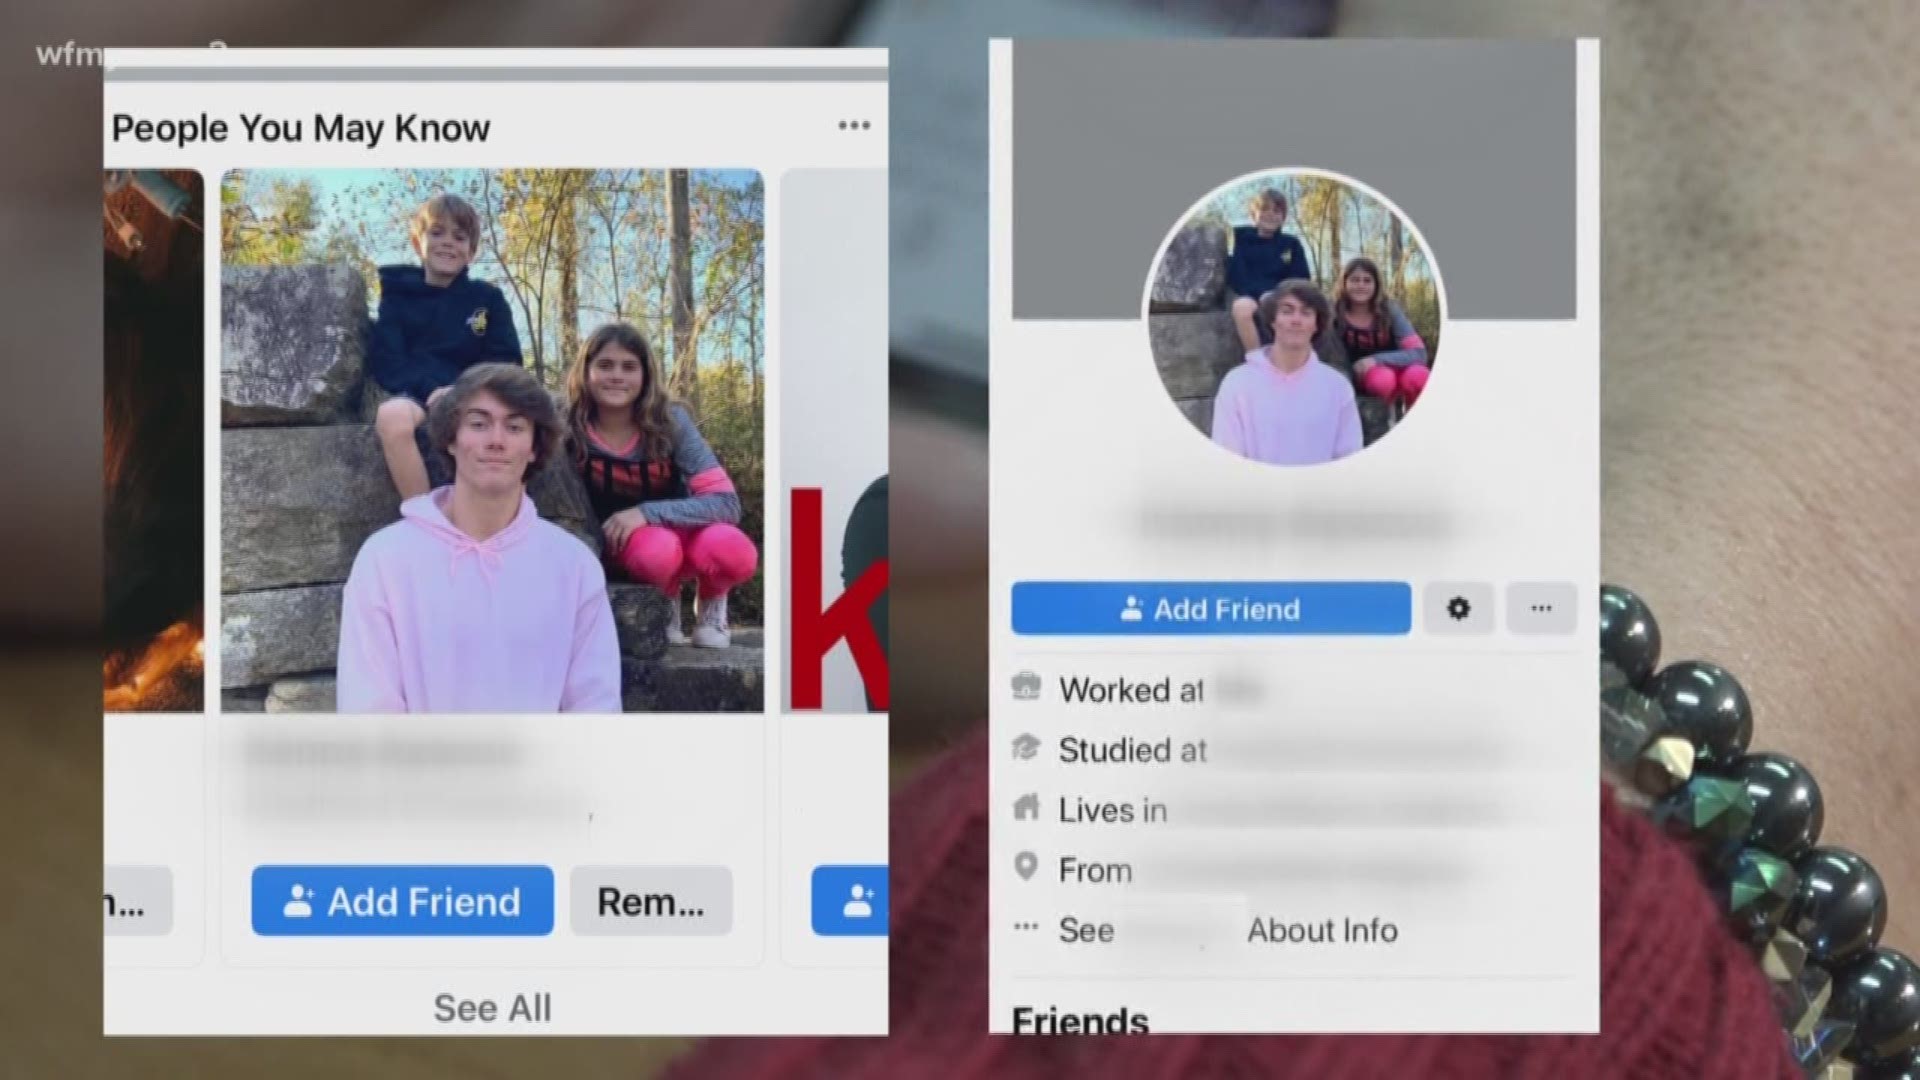 Archdale mom Becky Smith says she didn't think too much about her Facebook privacy settings, but then she saw her kids' picture being used as a stranger's profile ph